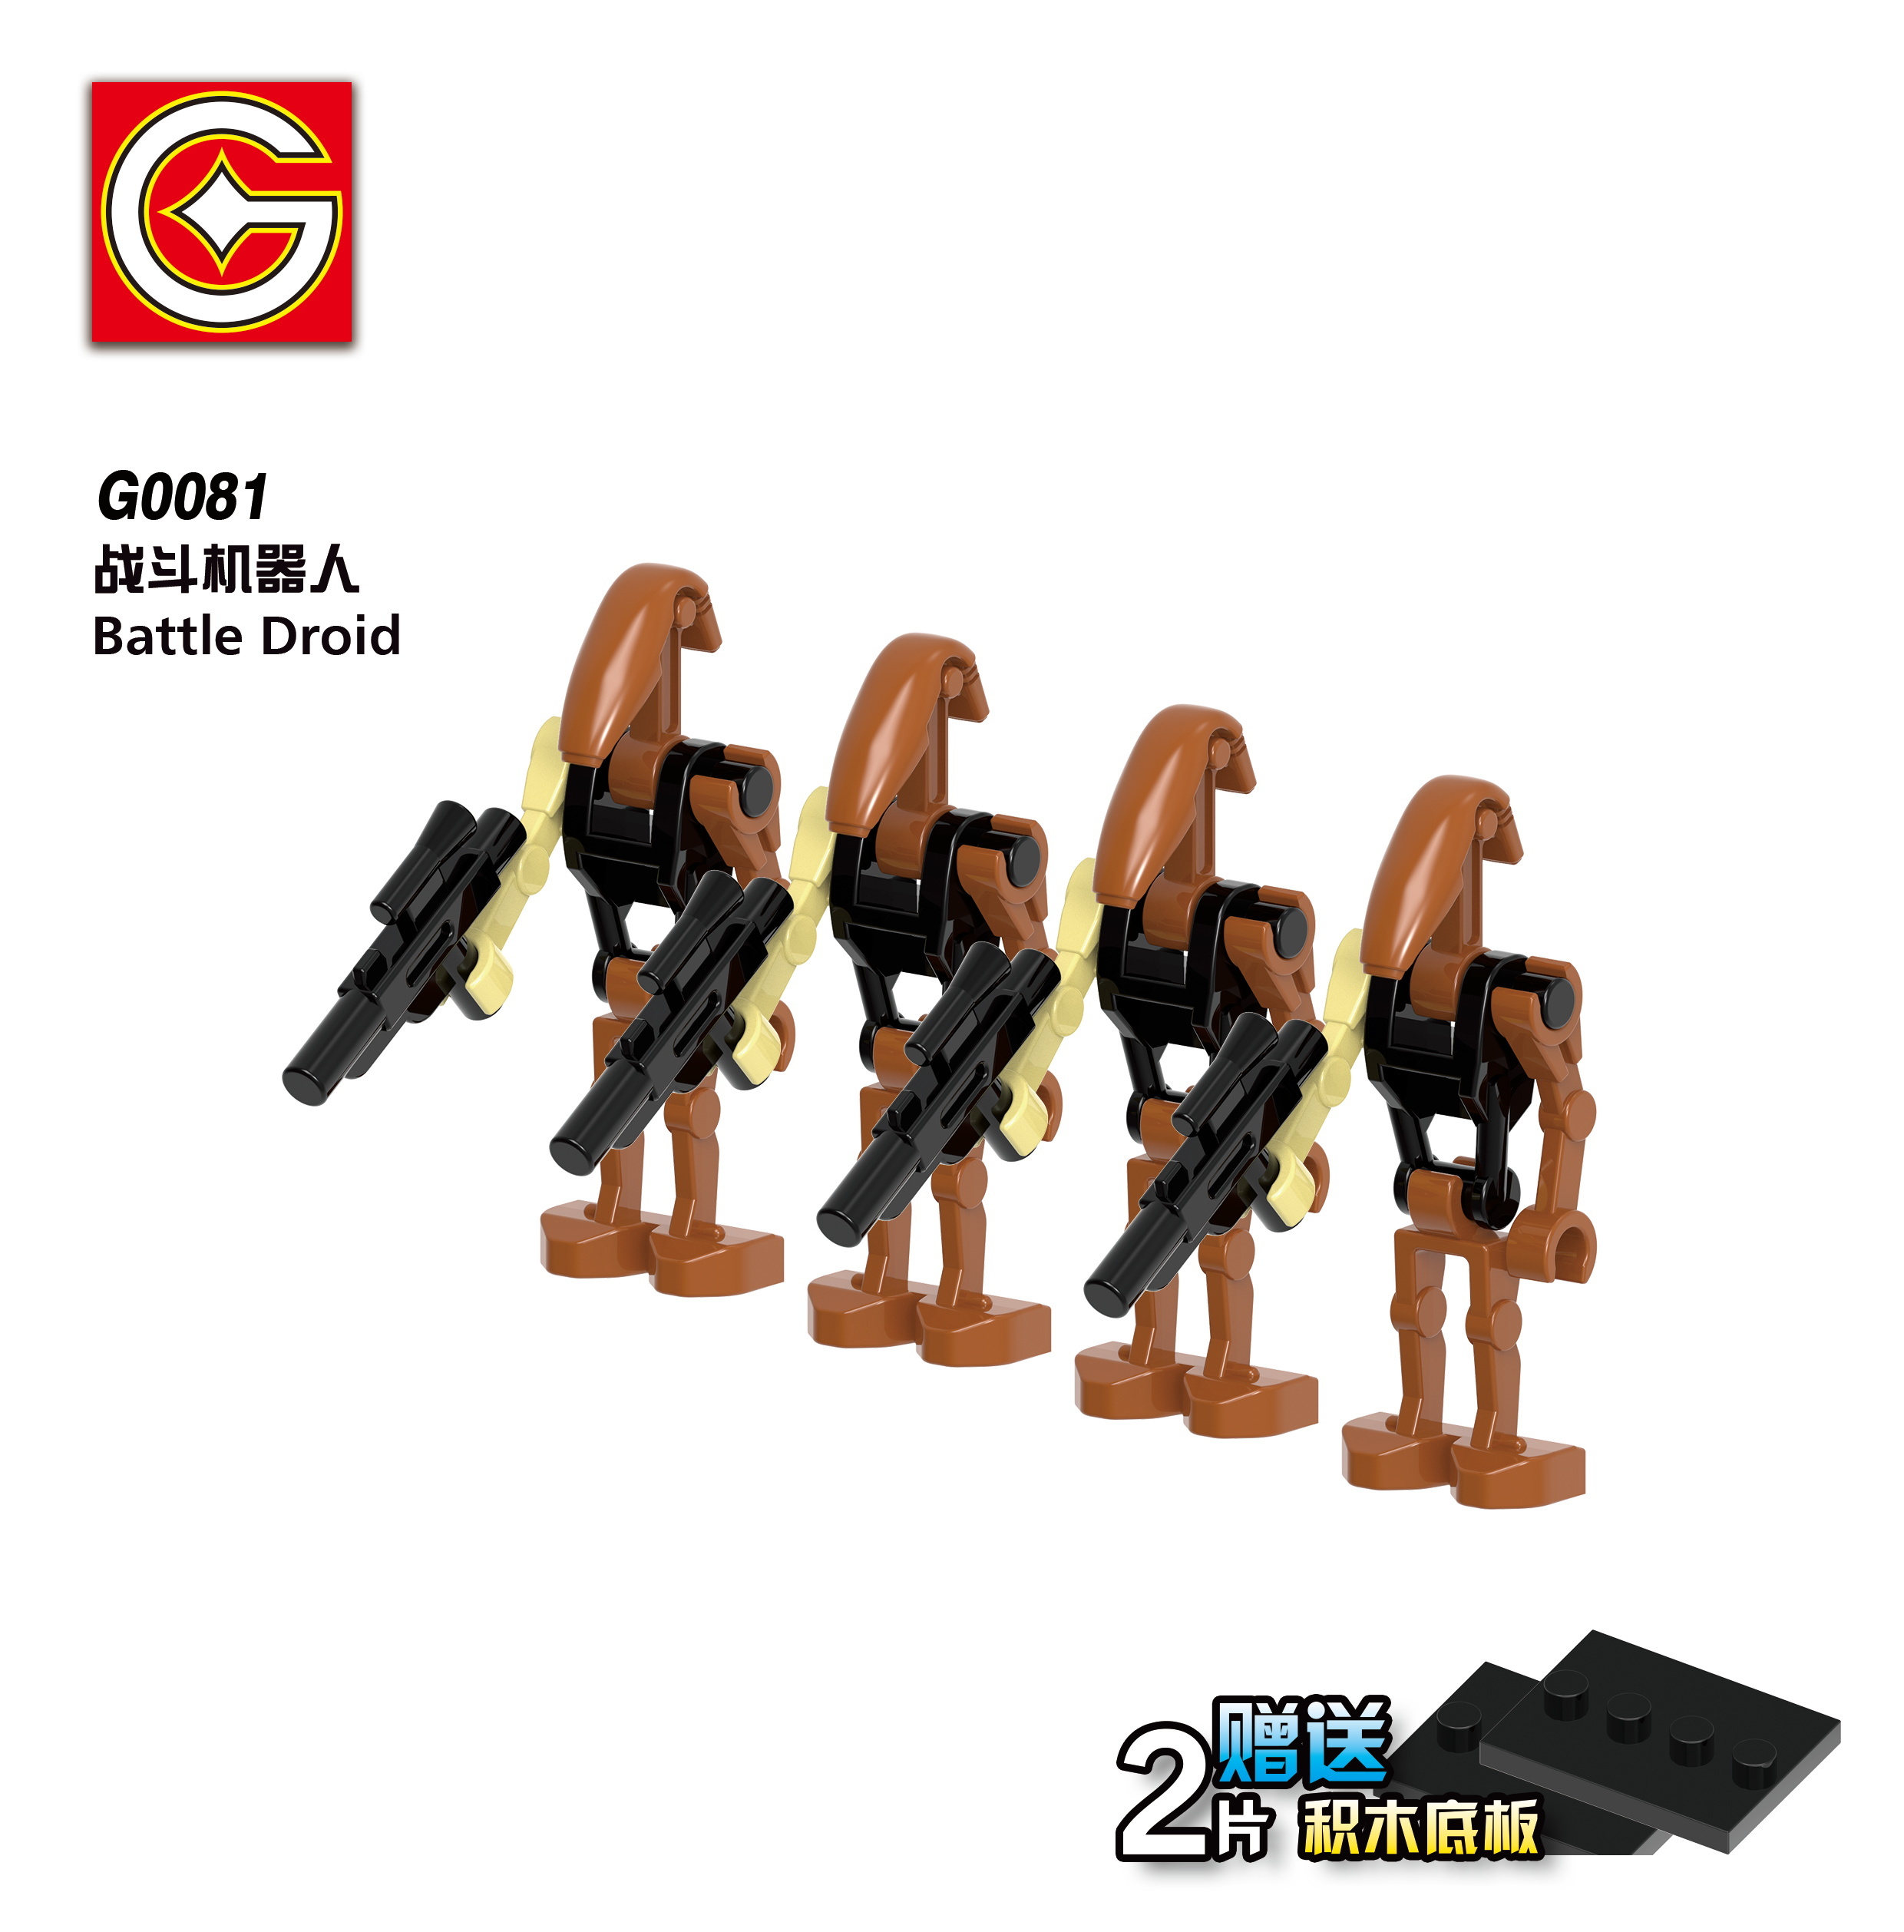 G0111 G0081 G0082 G0083 G0084 G0085 G0086 G0087 G0088 Star Wars Building Blocks War Machine Action Figures Educational Toys For Kids